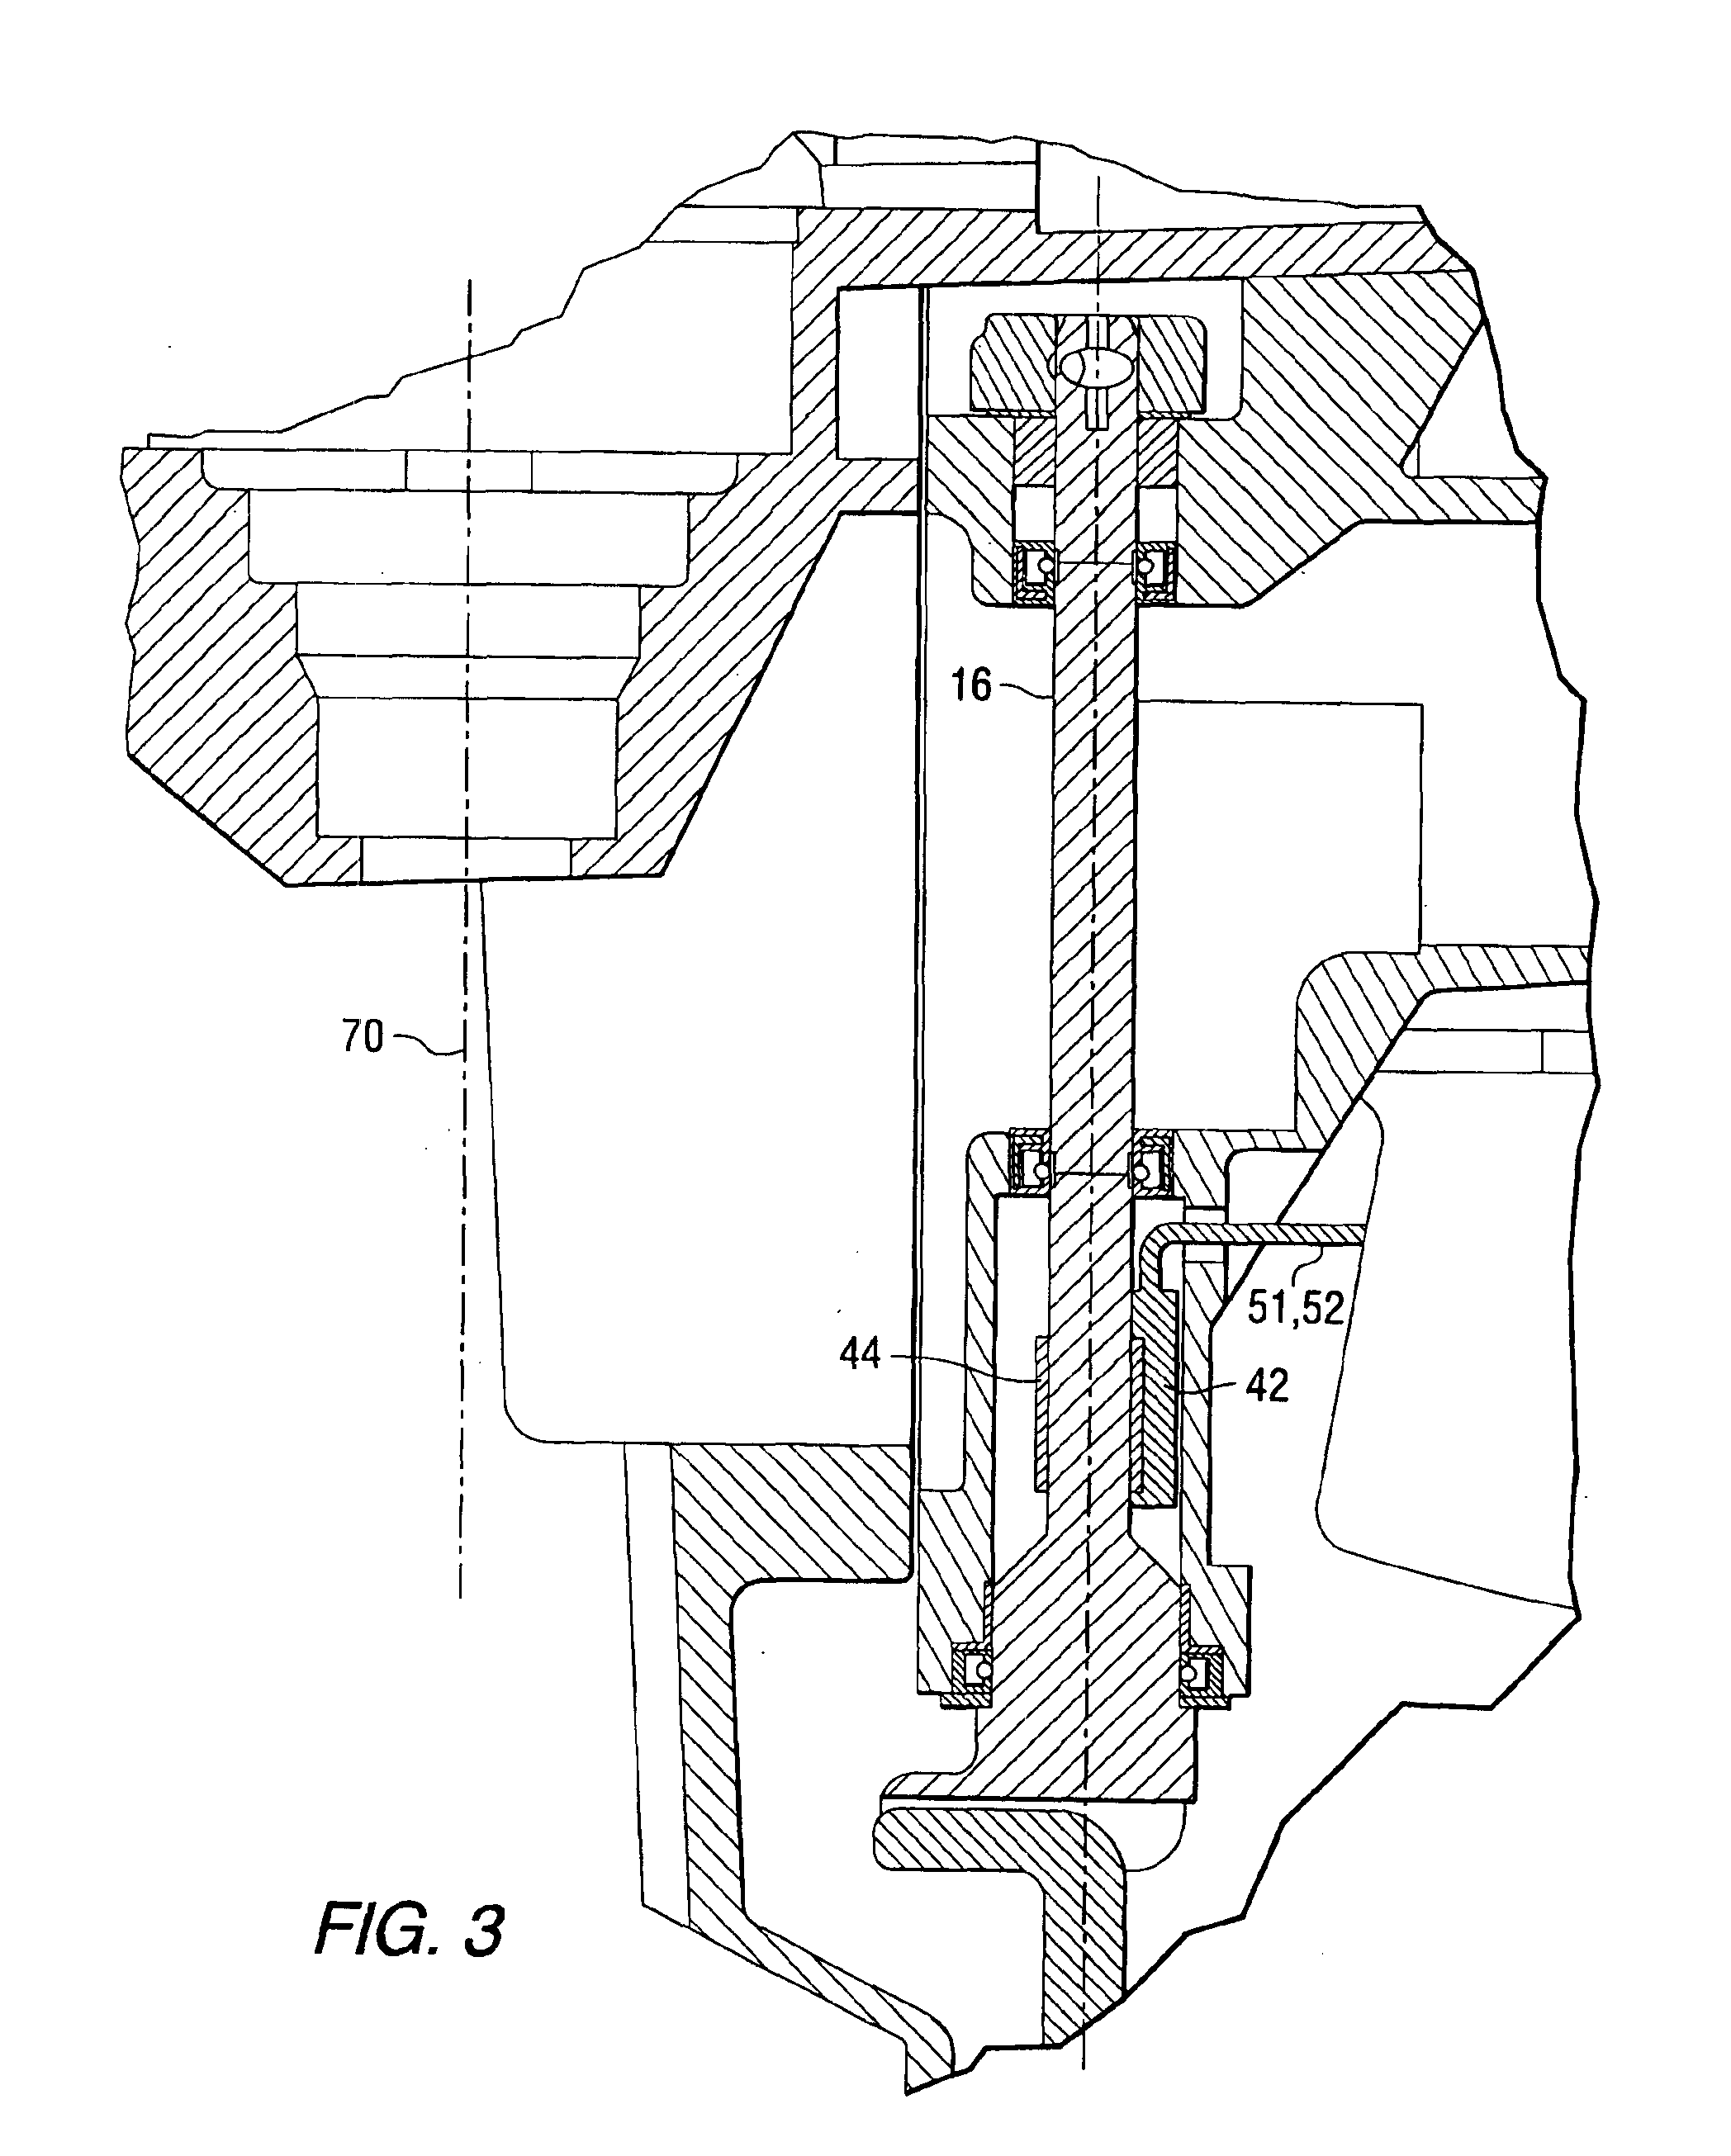 Method for controlling a shift procedure for a marine propulsion system